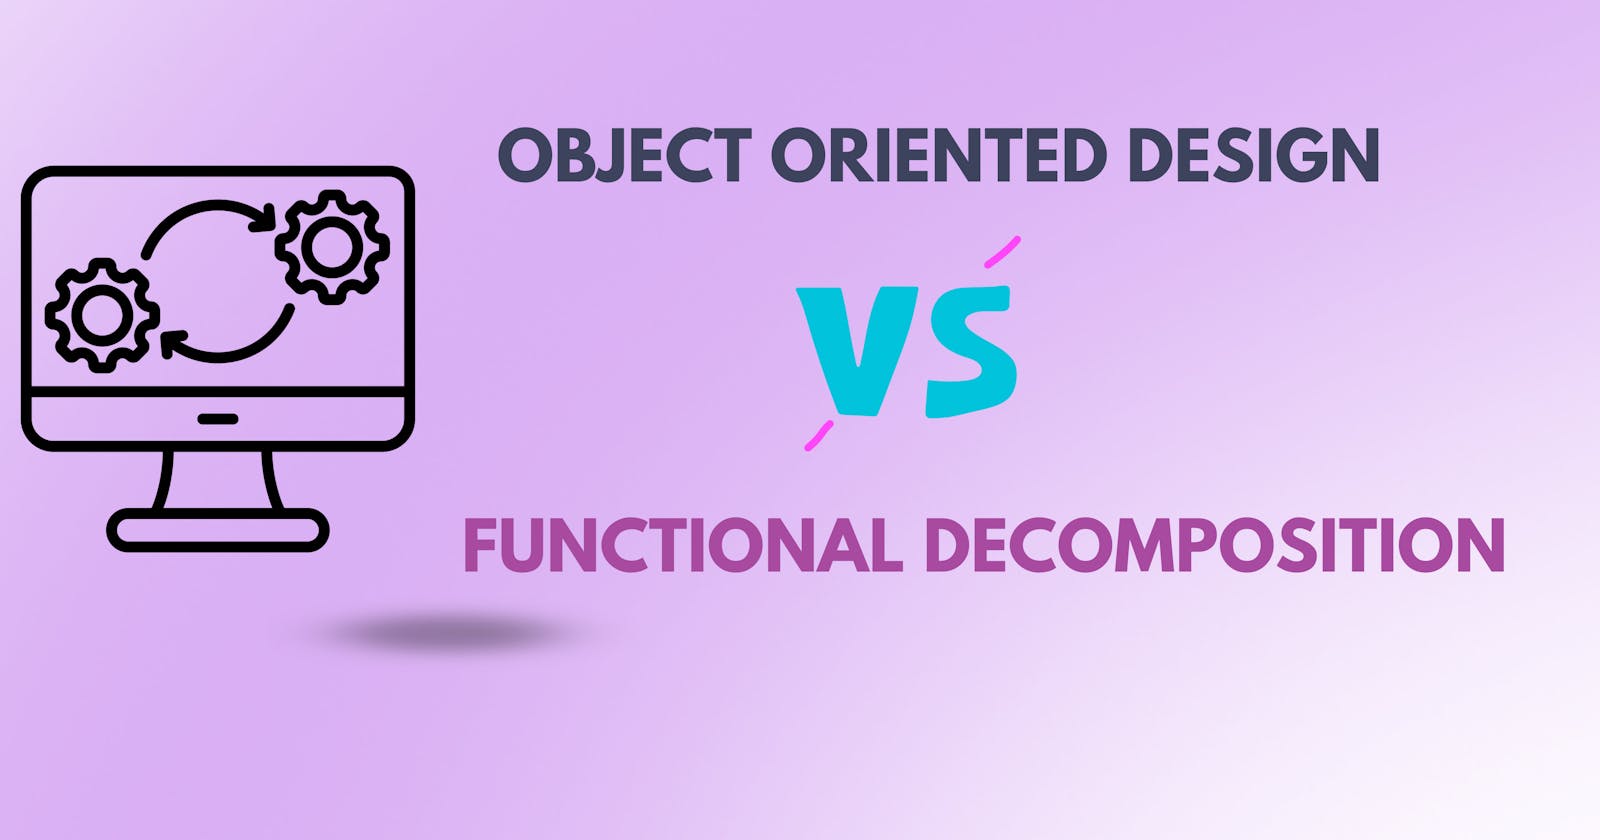 Object-Oriented Design vs Functional Decomposition